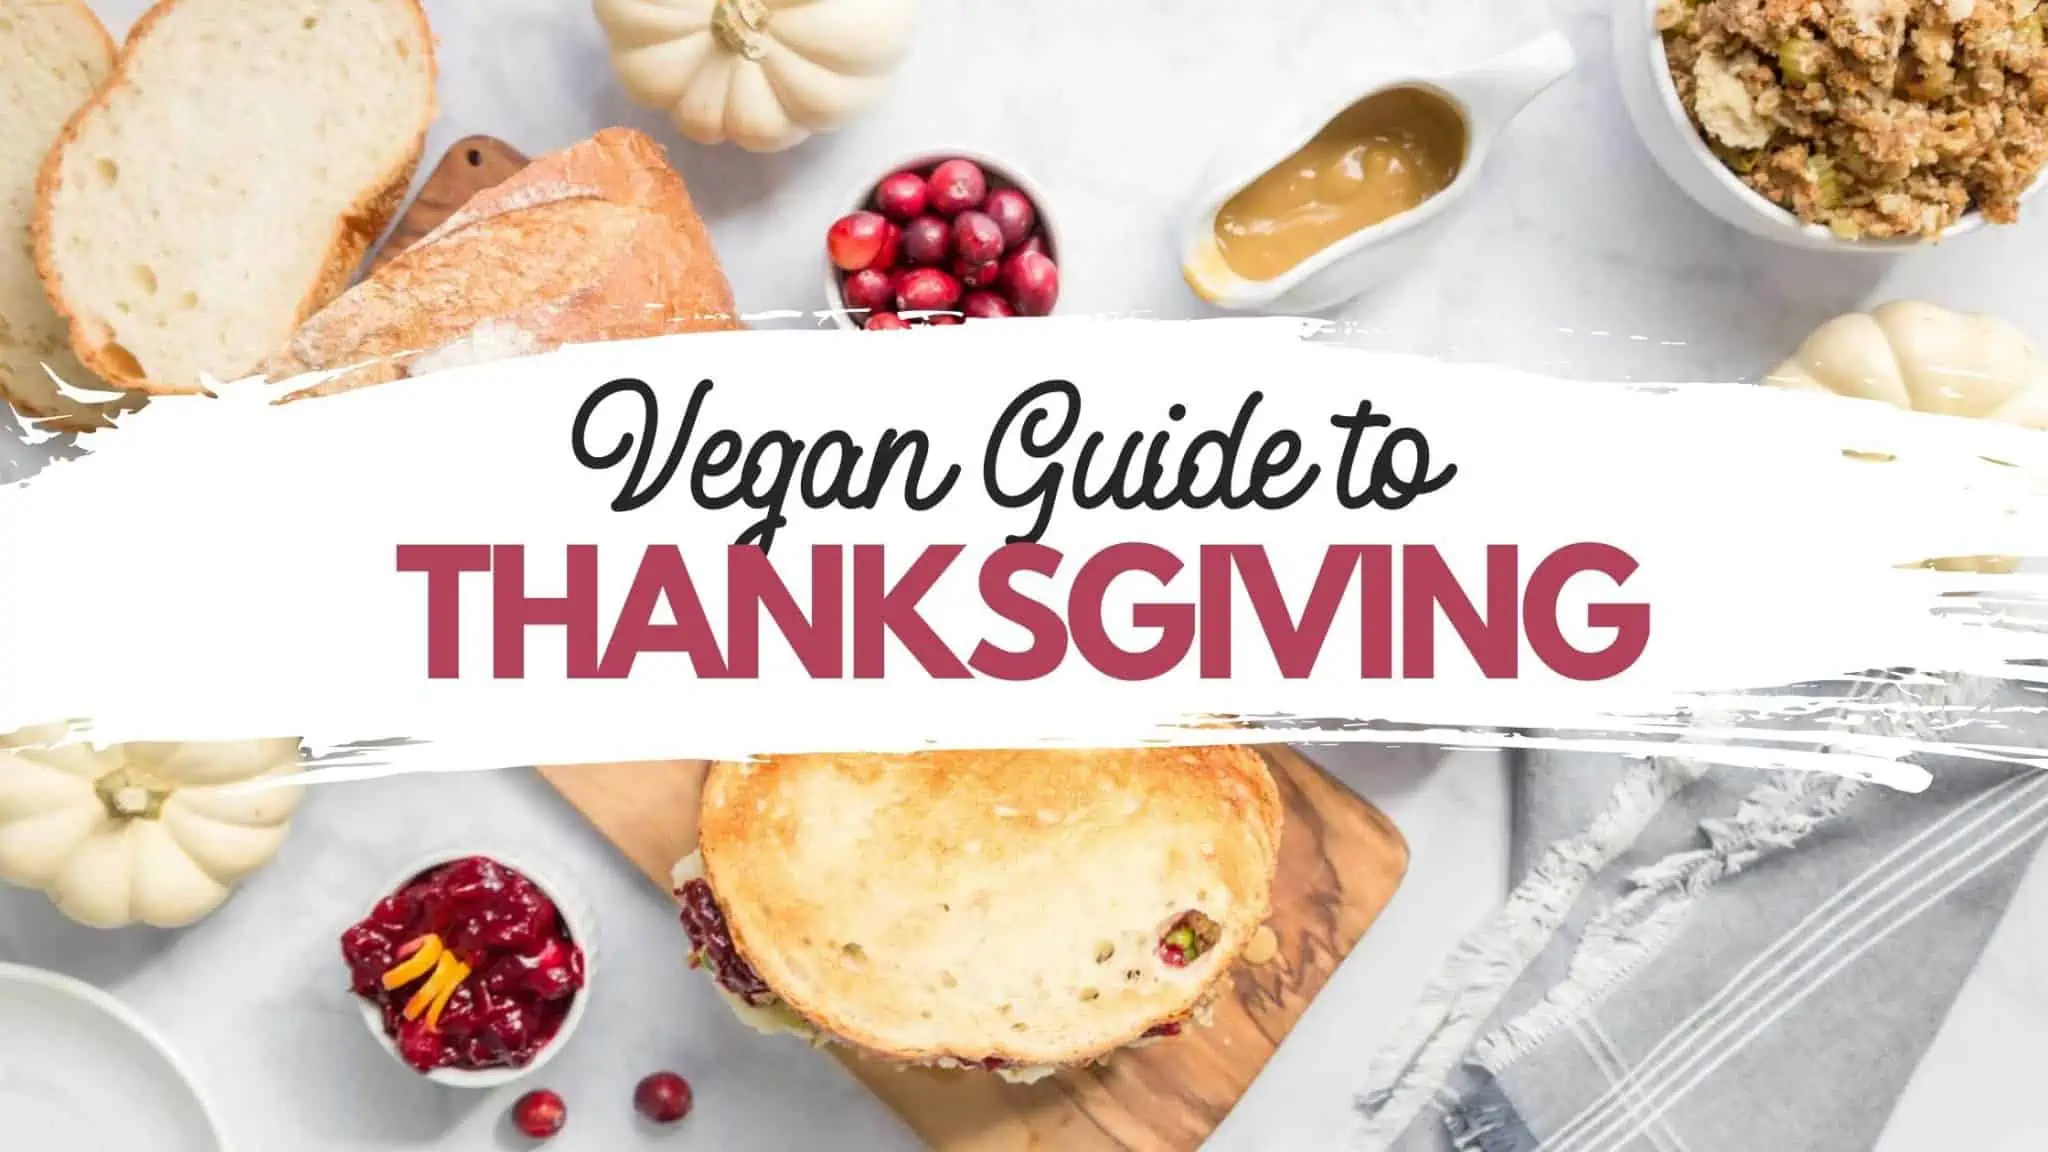 Vegan Thanksgiving Guide to Recipes Roasts and Celebrating the Holiday the Plant-Based Way